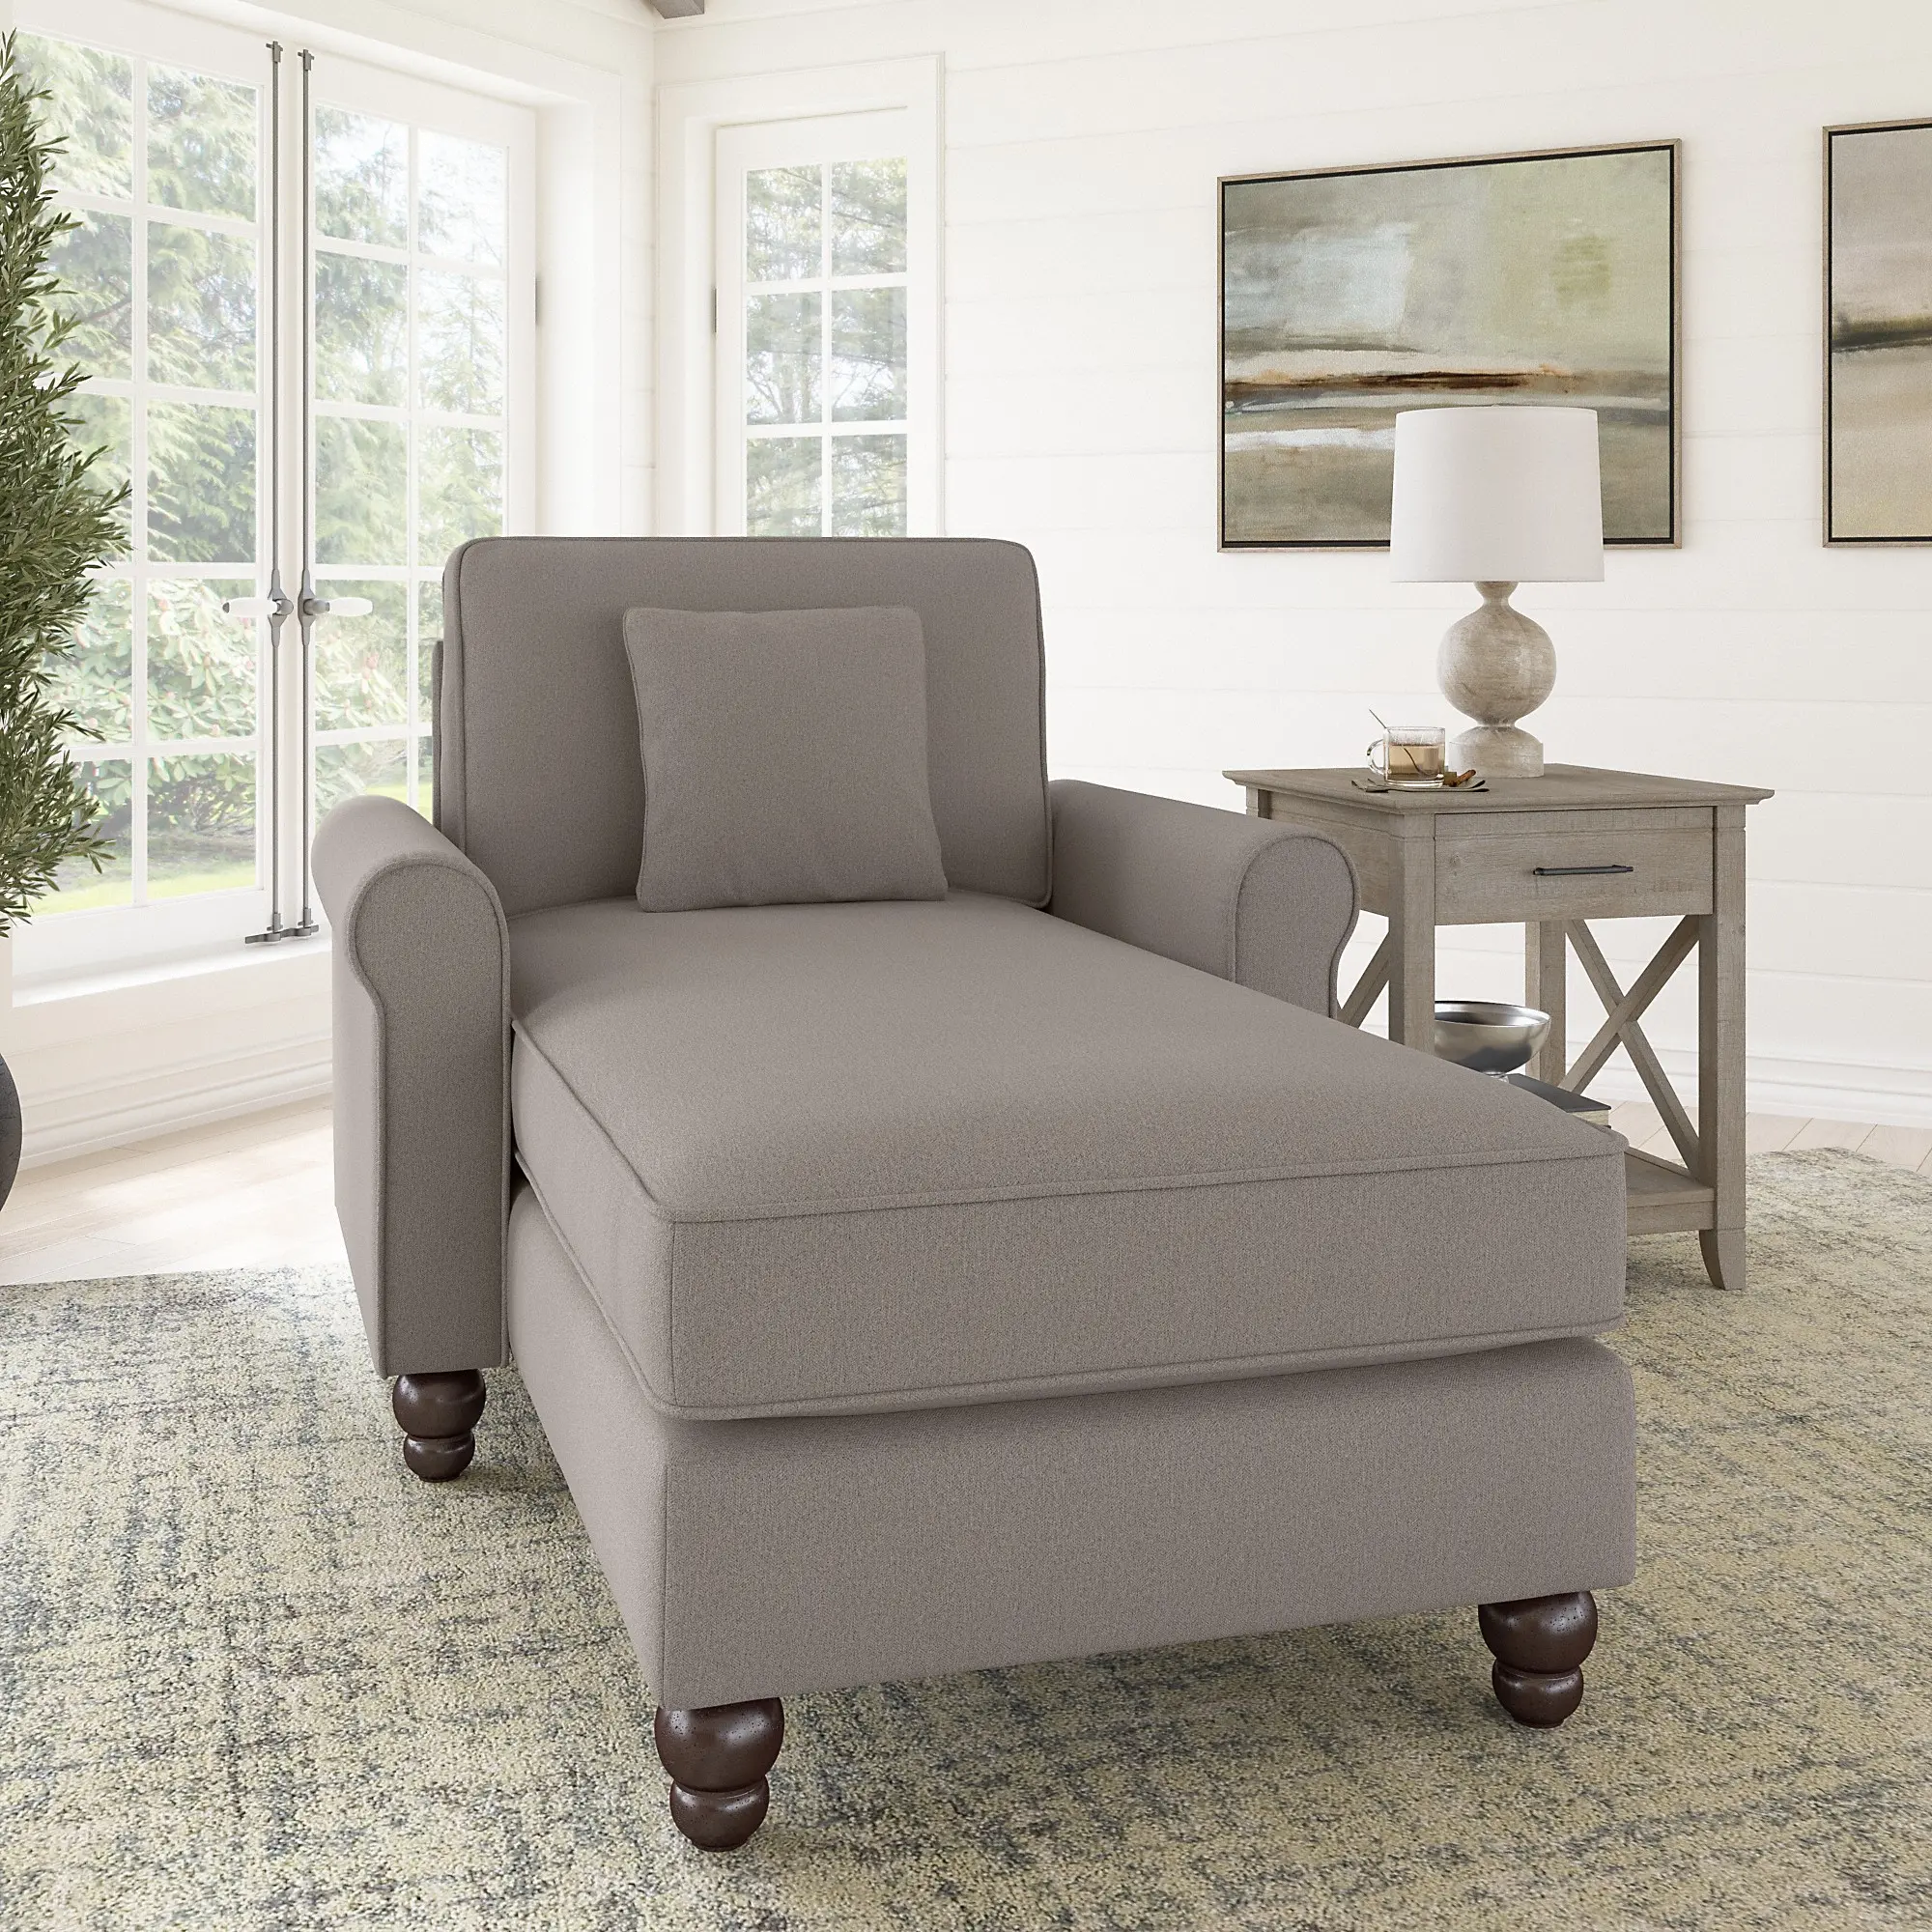 Hudson Beige Chaise Lounge with Arms - Bush Furniture